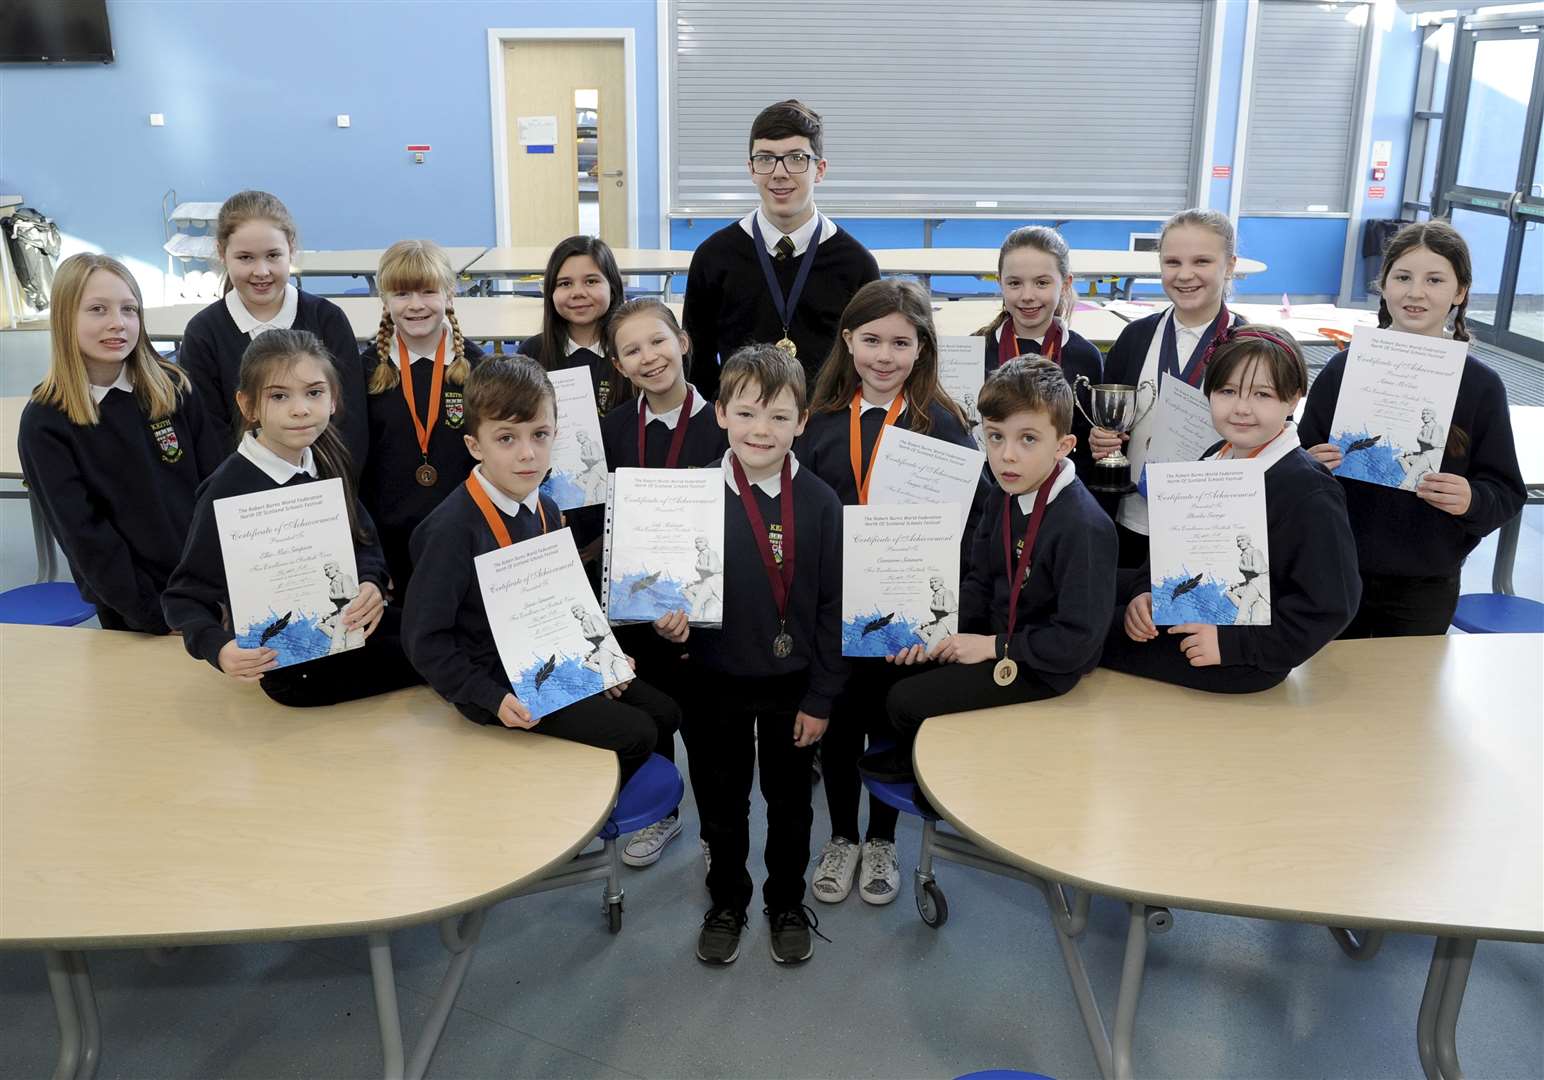 Burns Federation competitors at Keith Primary School. Winners of verse. Picture: Eric Cormack